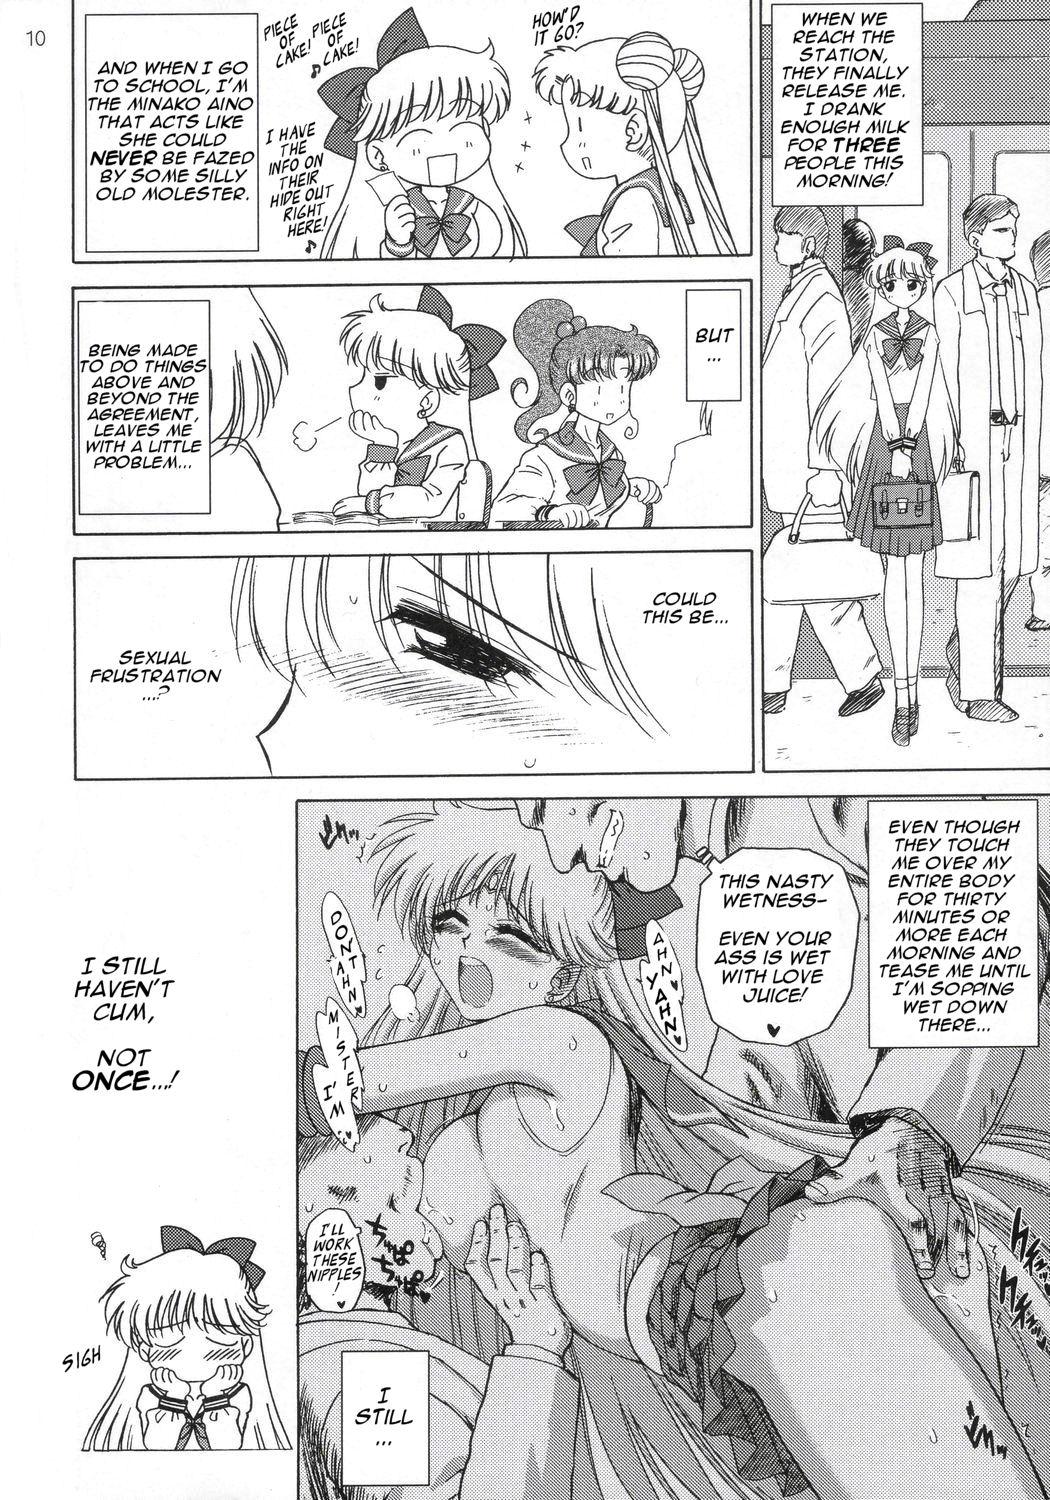 Threesome Super Fly - Sailor moon Blowjobs - Page 9